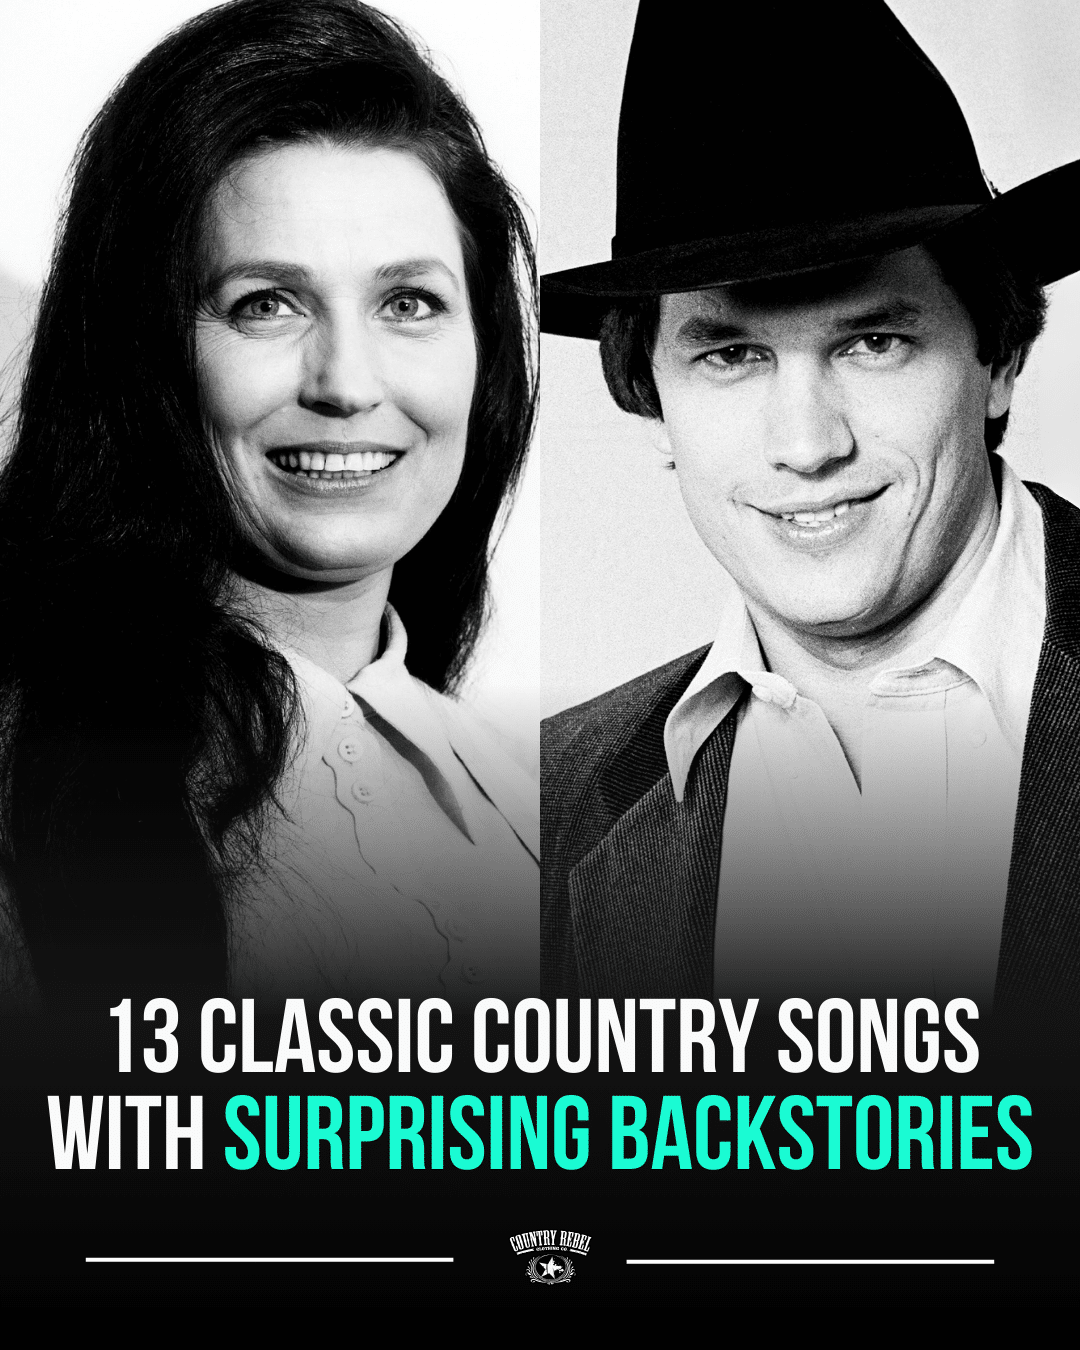 Classic Country Songs With Surprising Backstories - Loretta Lynn and George Strait are represented side-by-side in these pictures.